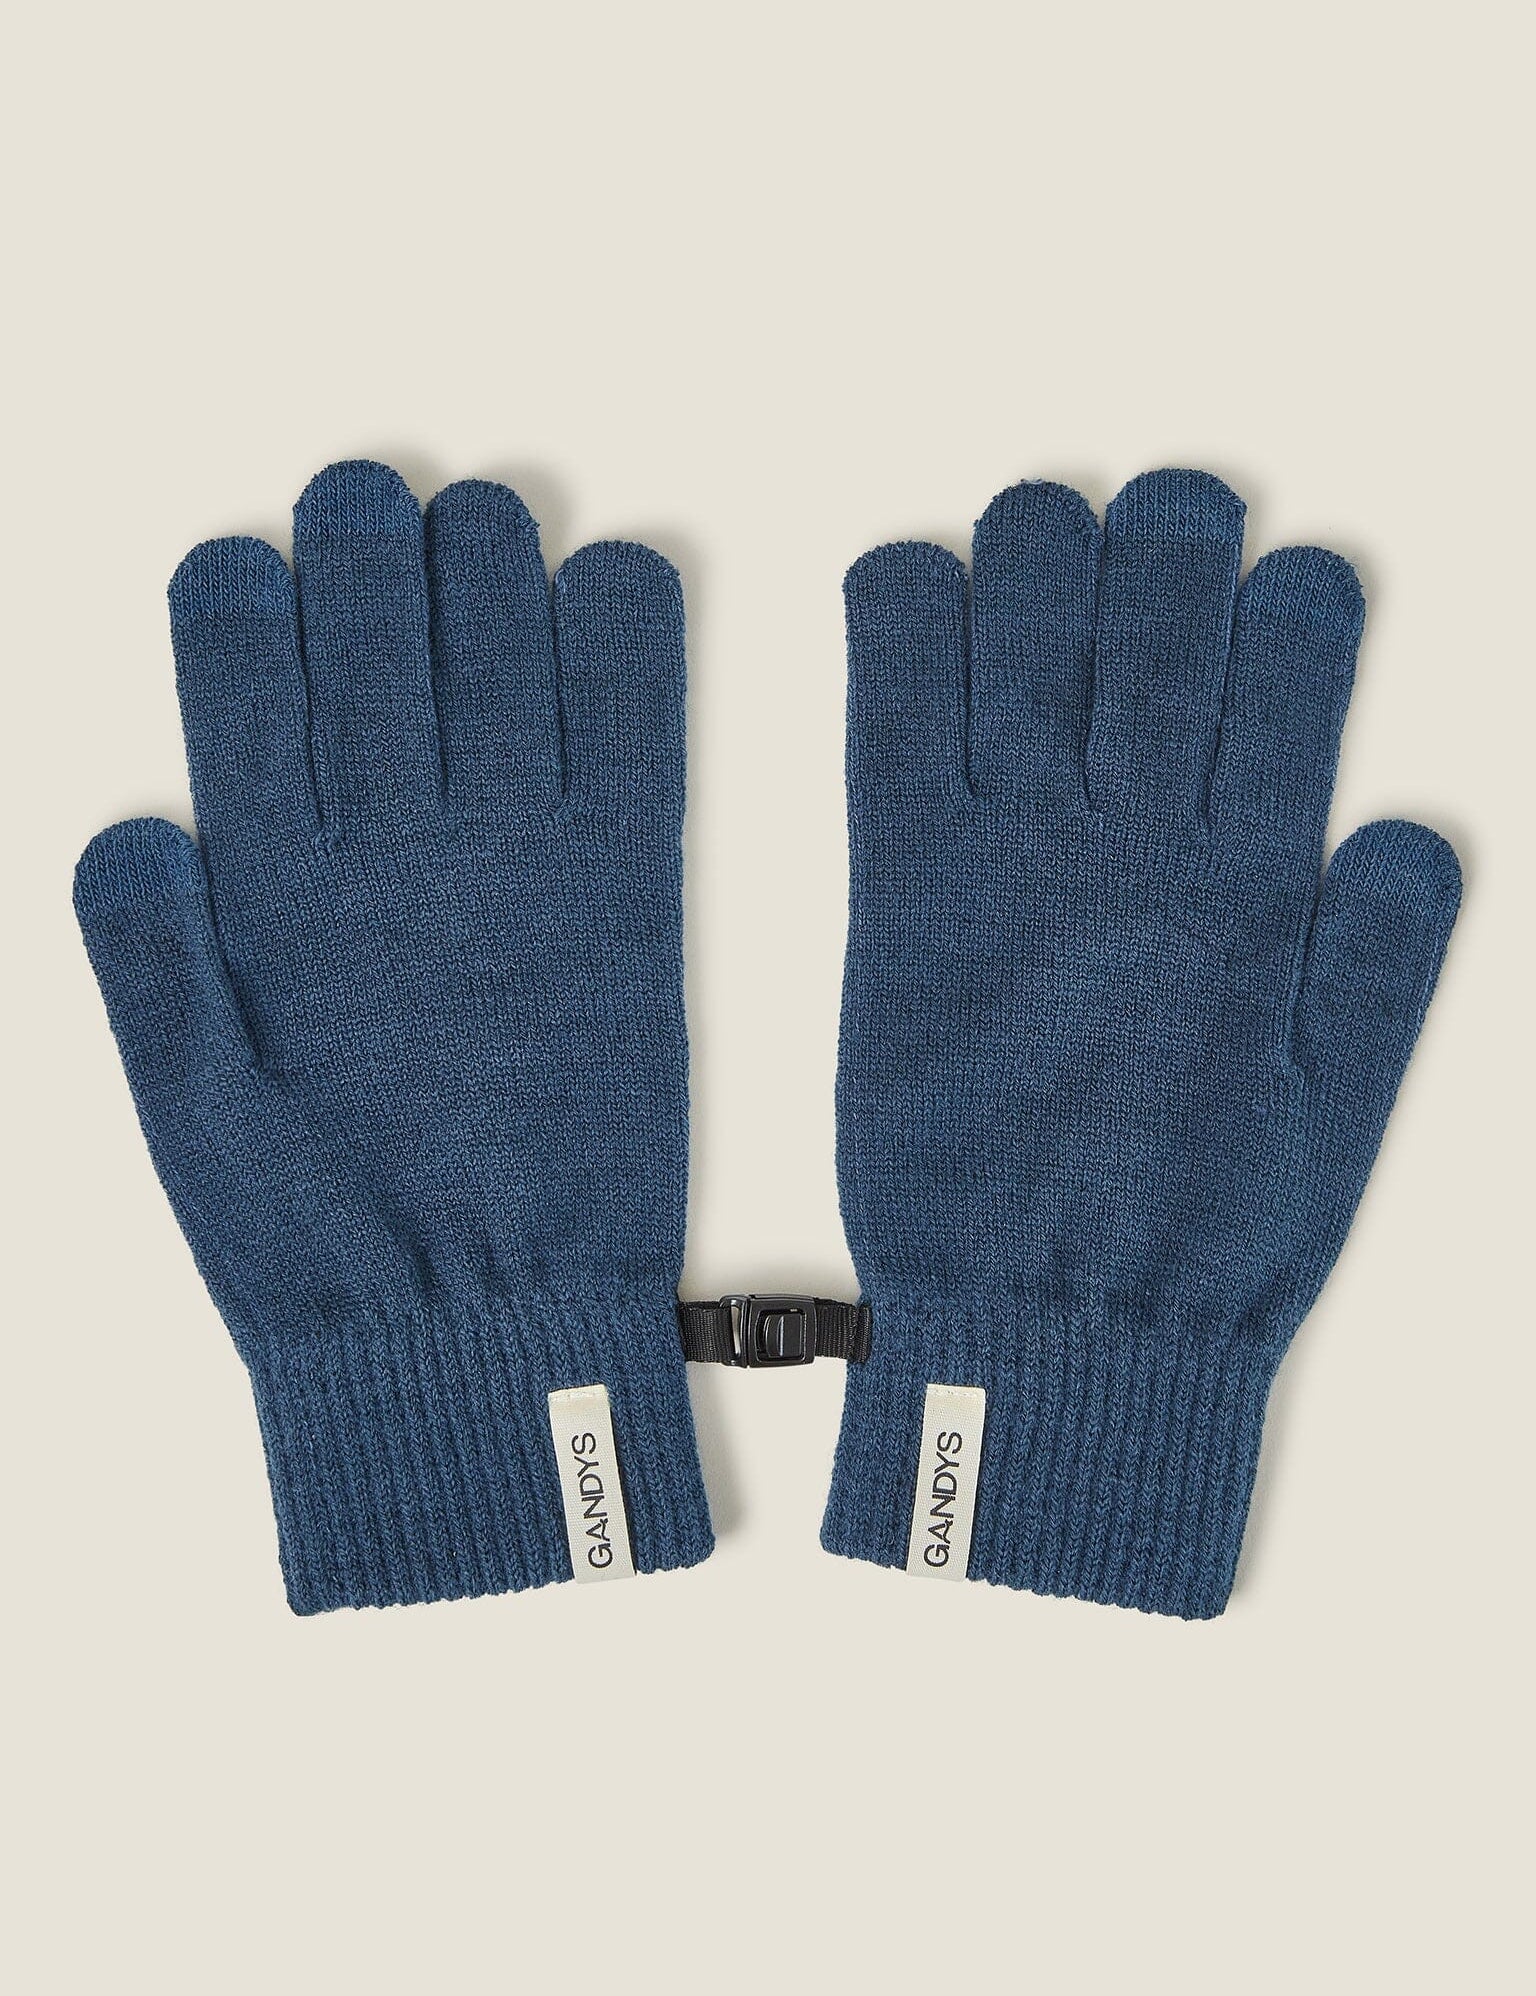 teal-recycled-touch-screen-gloves-873876.jpg